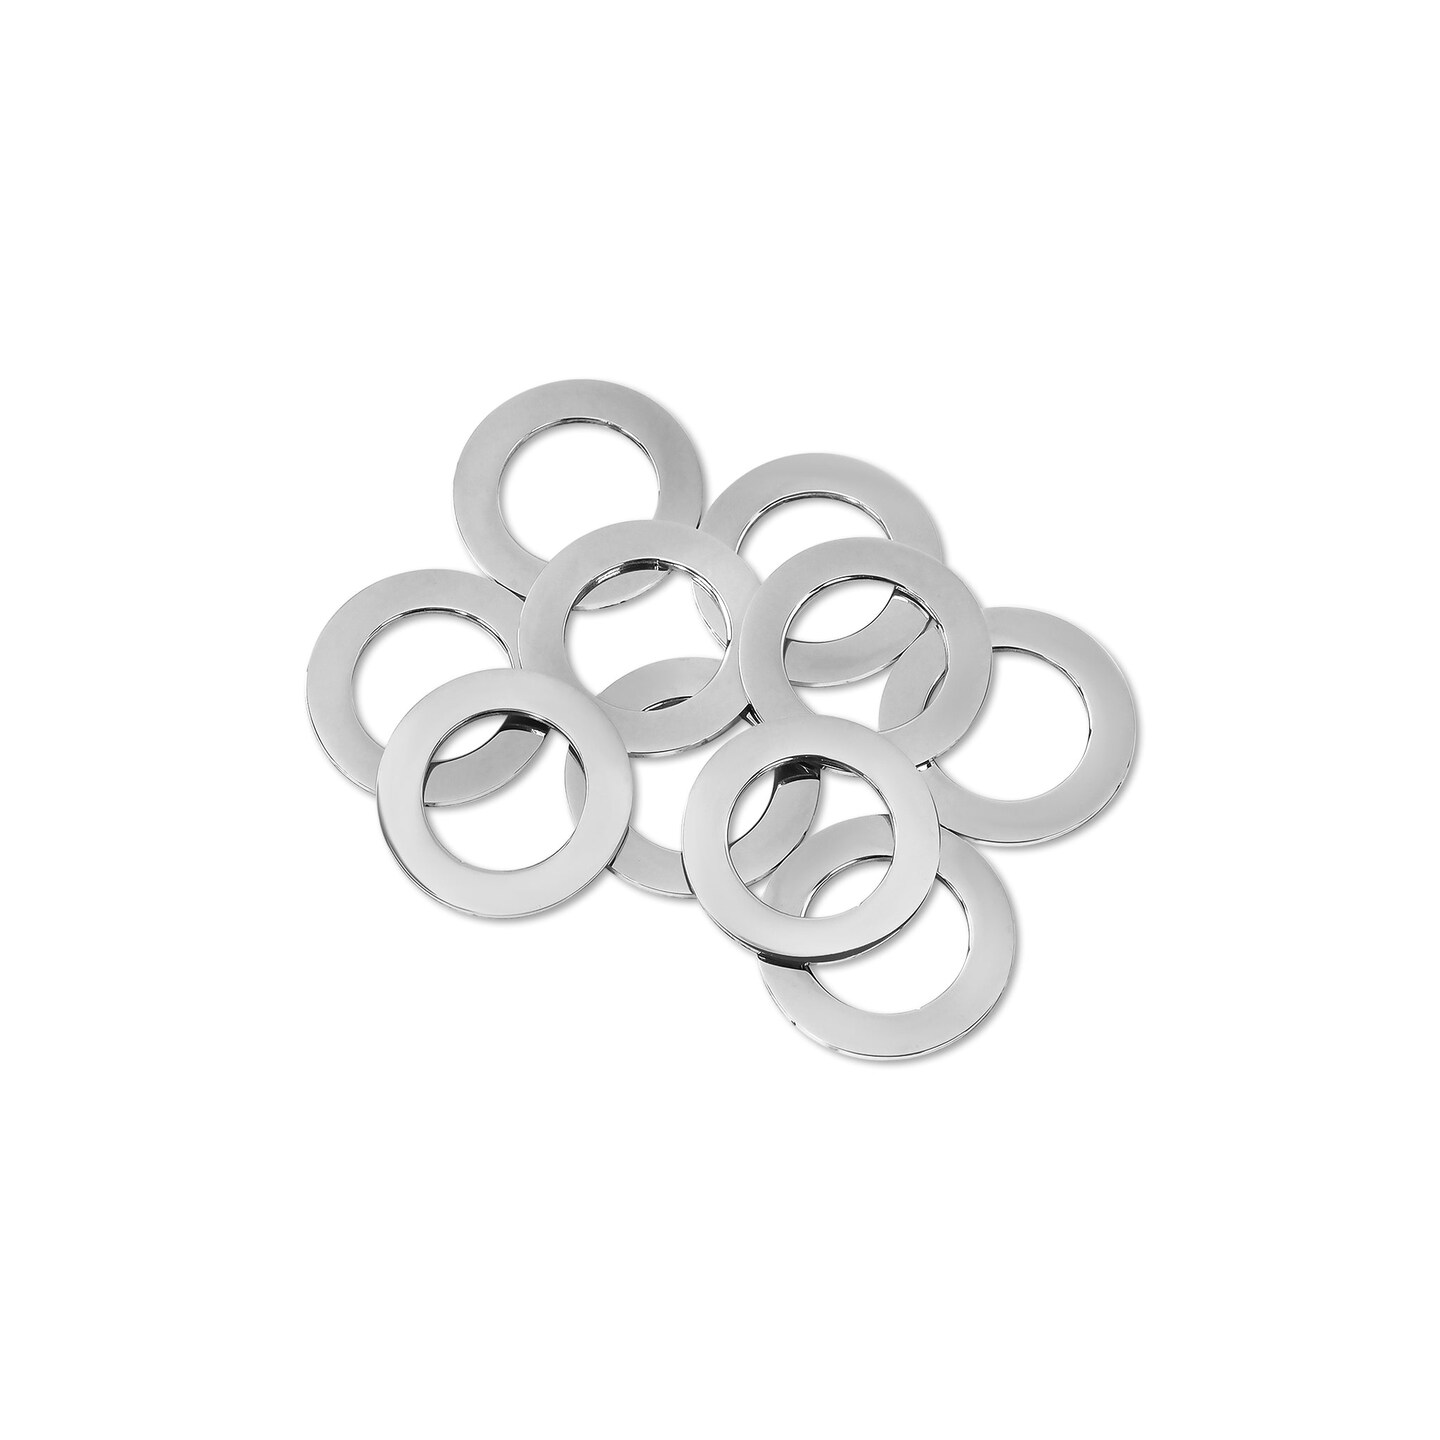 10 Pack - Stainless Steel Washer Pendants